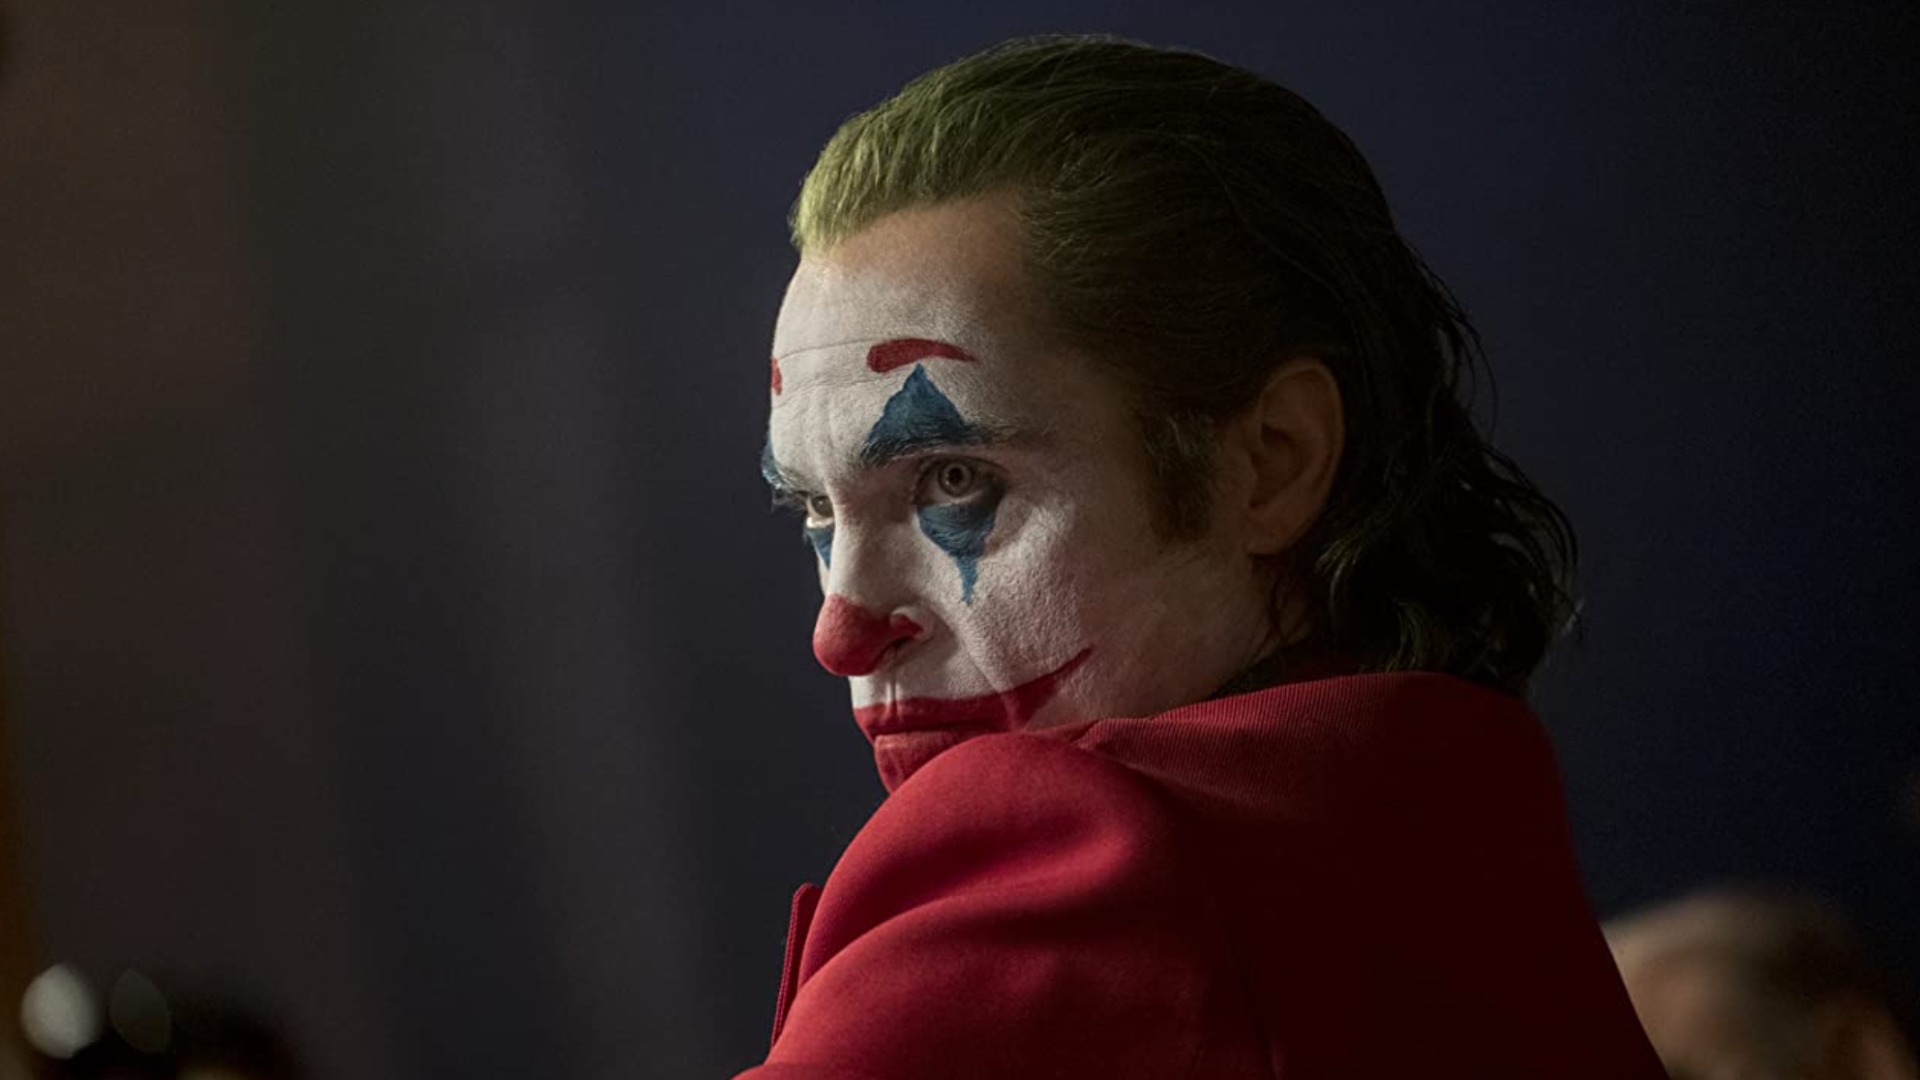 Joker 2 officially going ahead as director reveals new working title